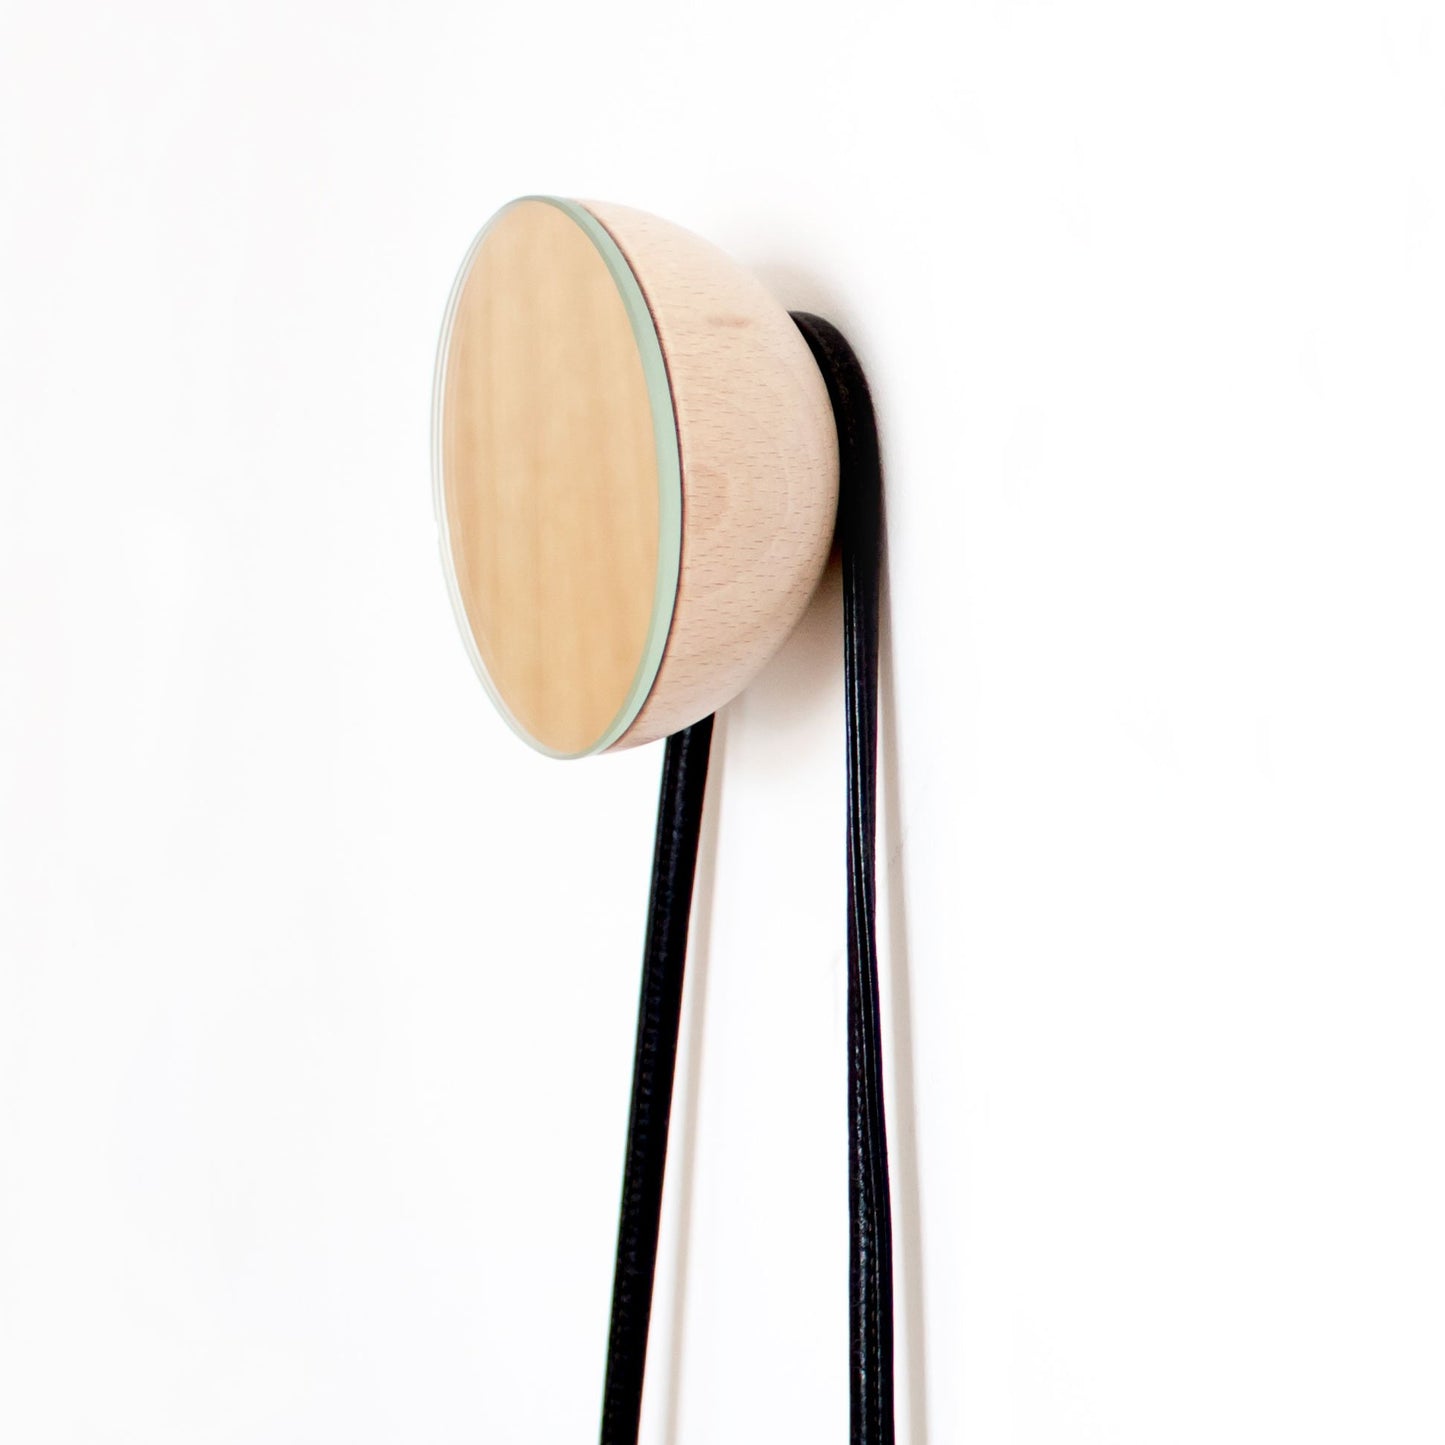 Buy Round Beech Wood Wall Mounted Mirror Coat Hook by Violet Eurynome